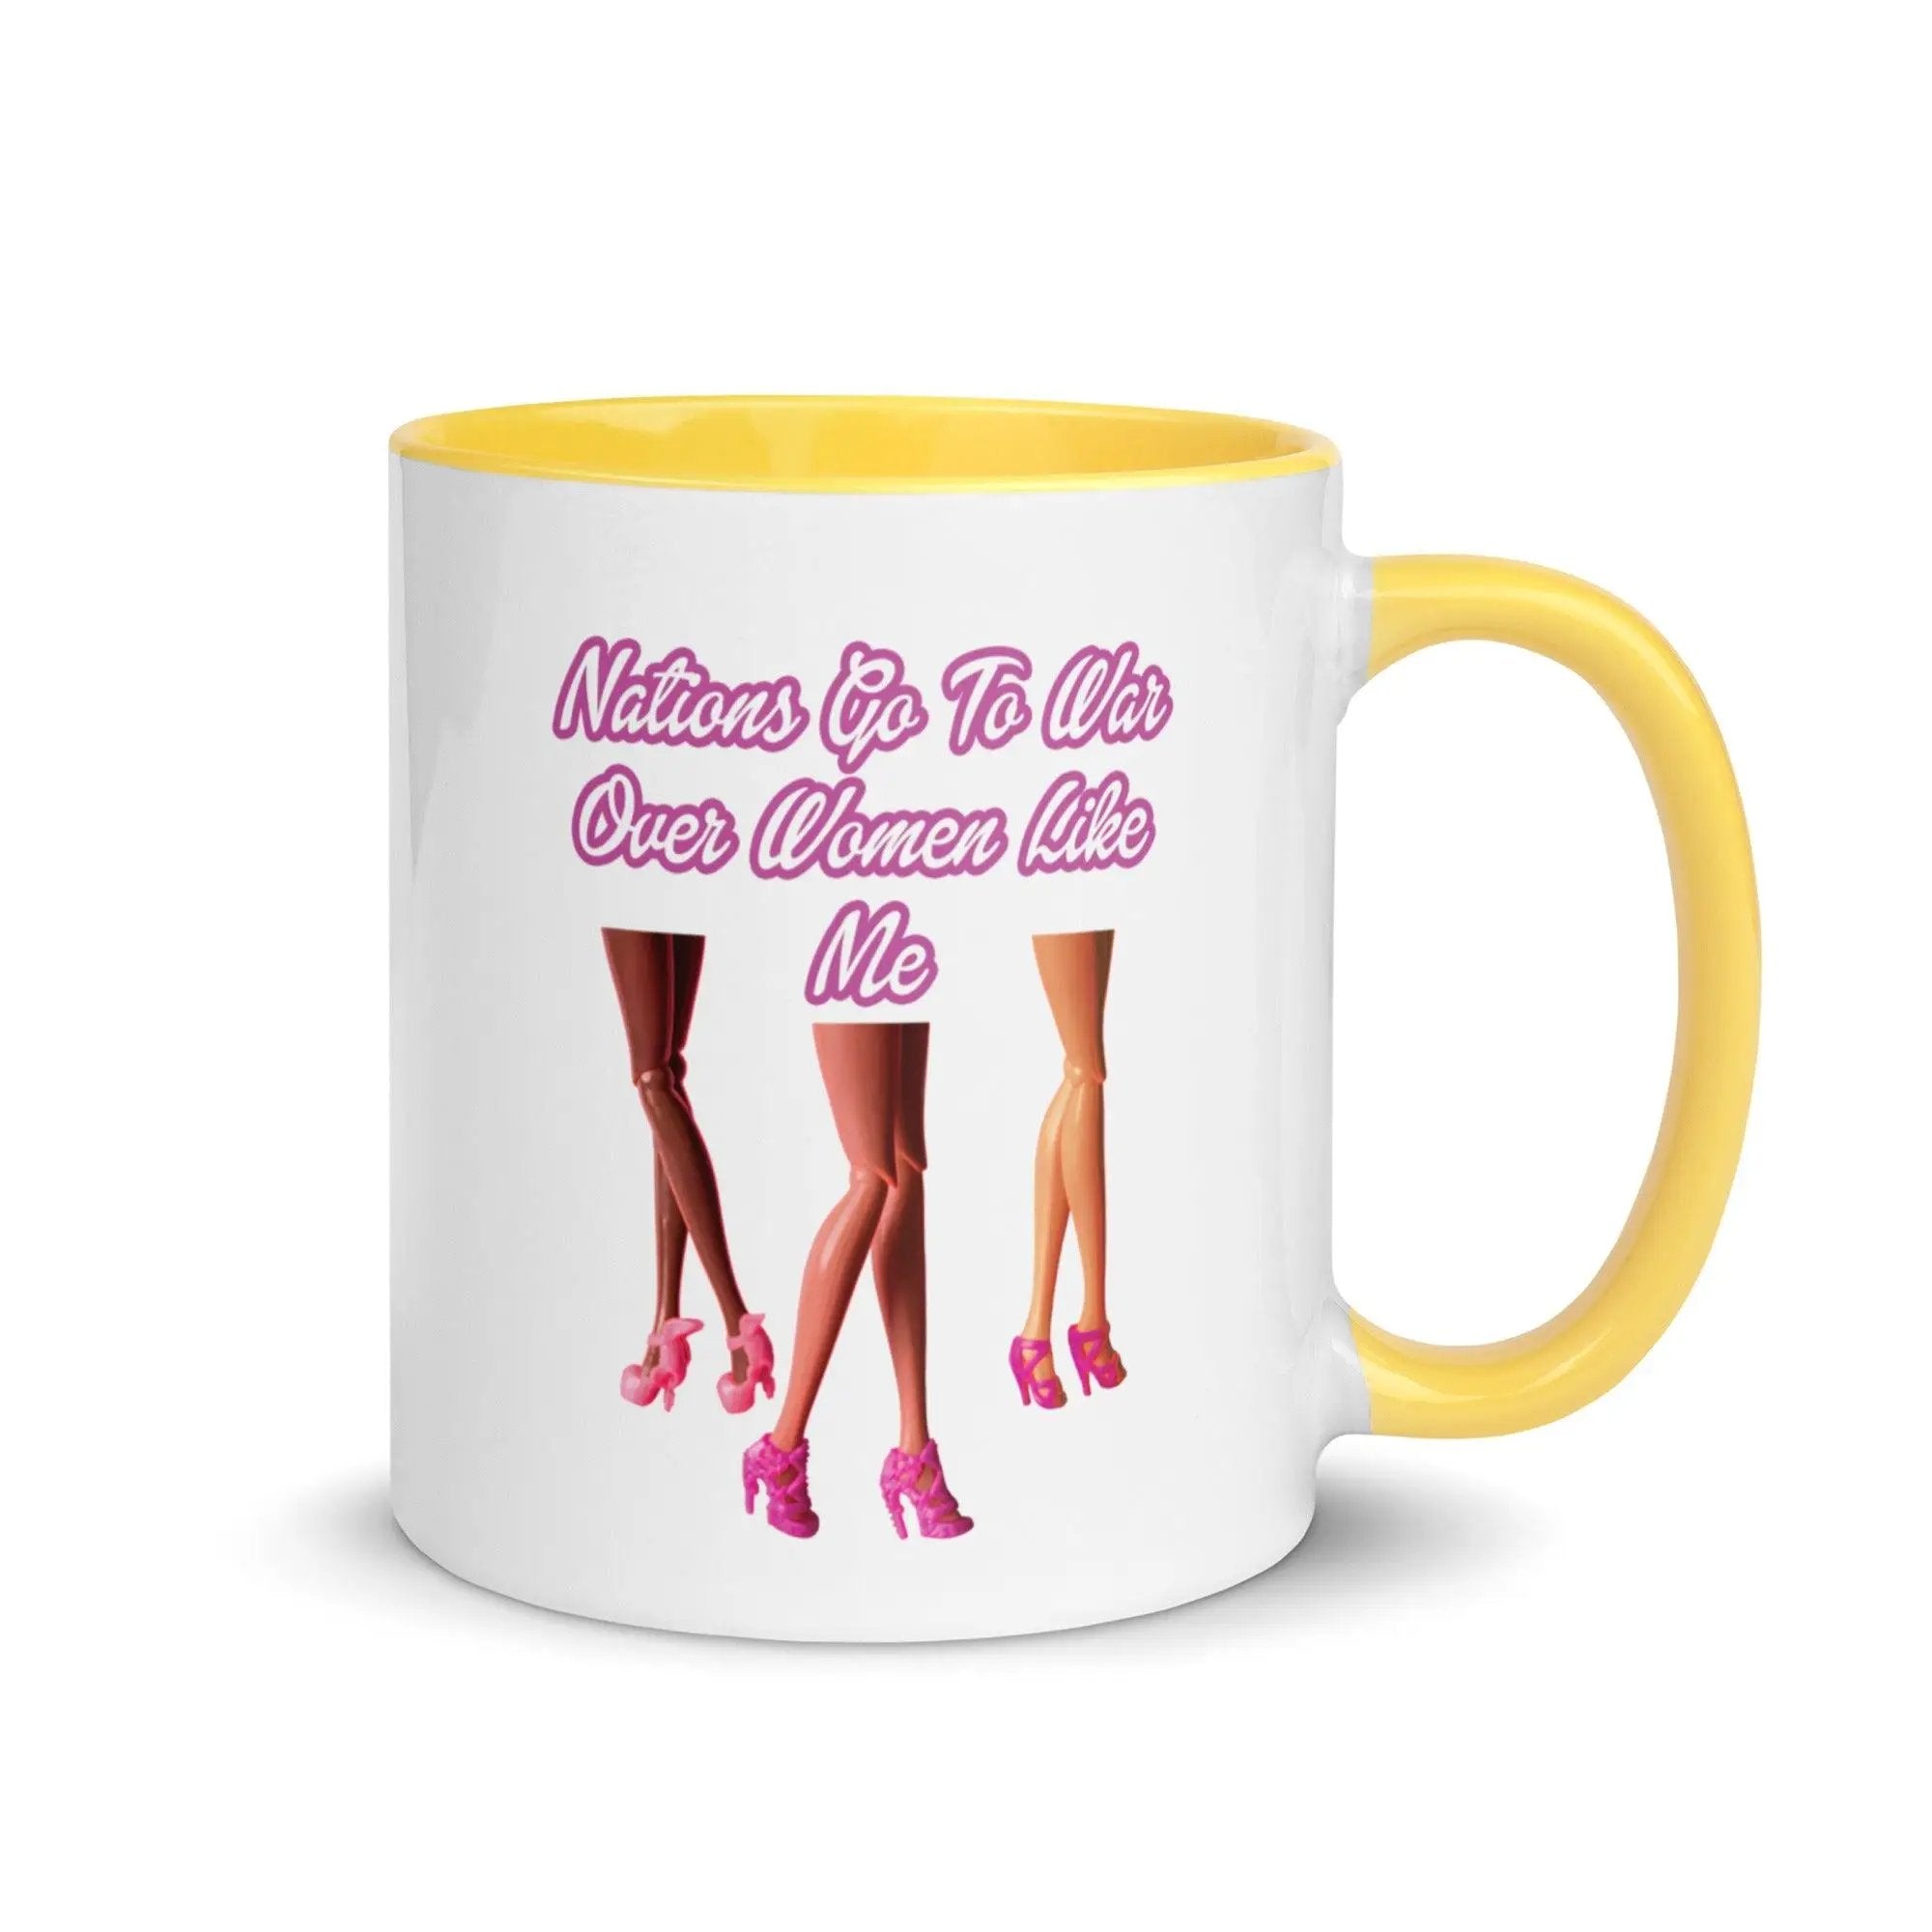 Nations Go To War Over Women Like Me Mug with Color Inside VAWDesigns